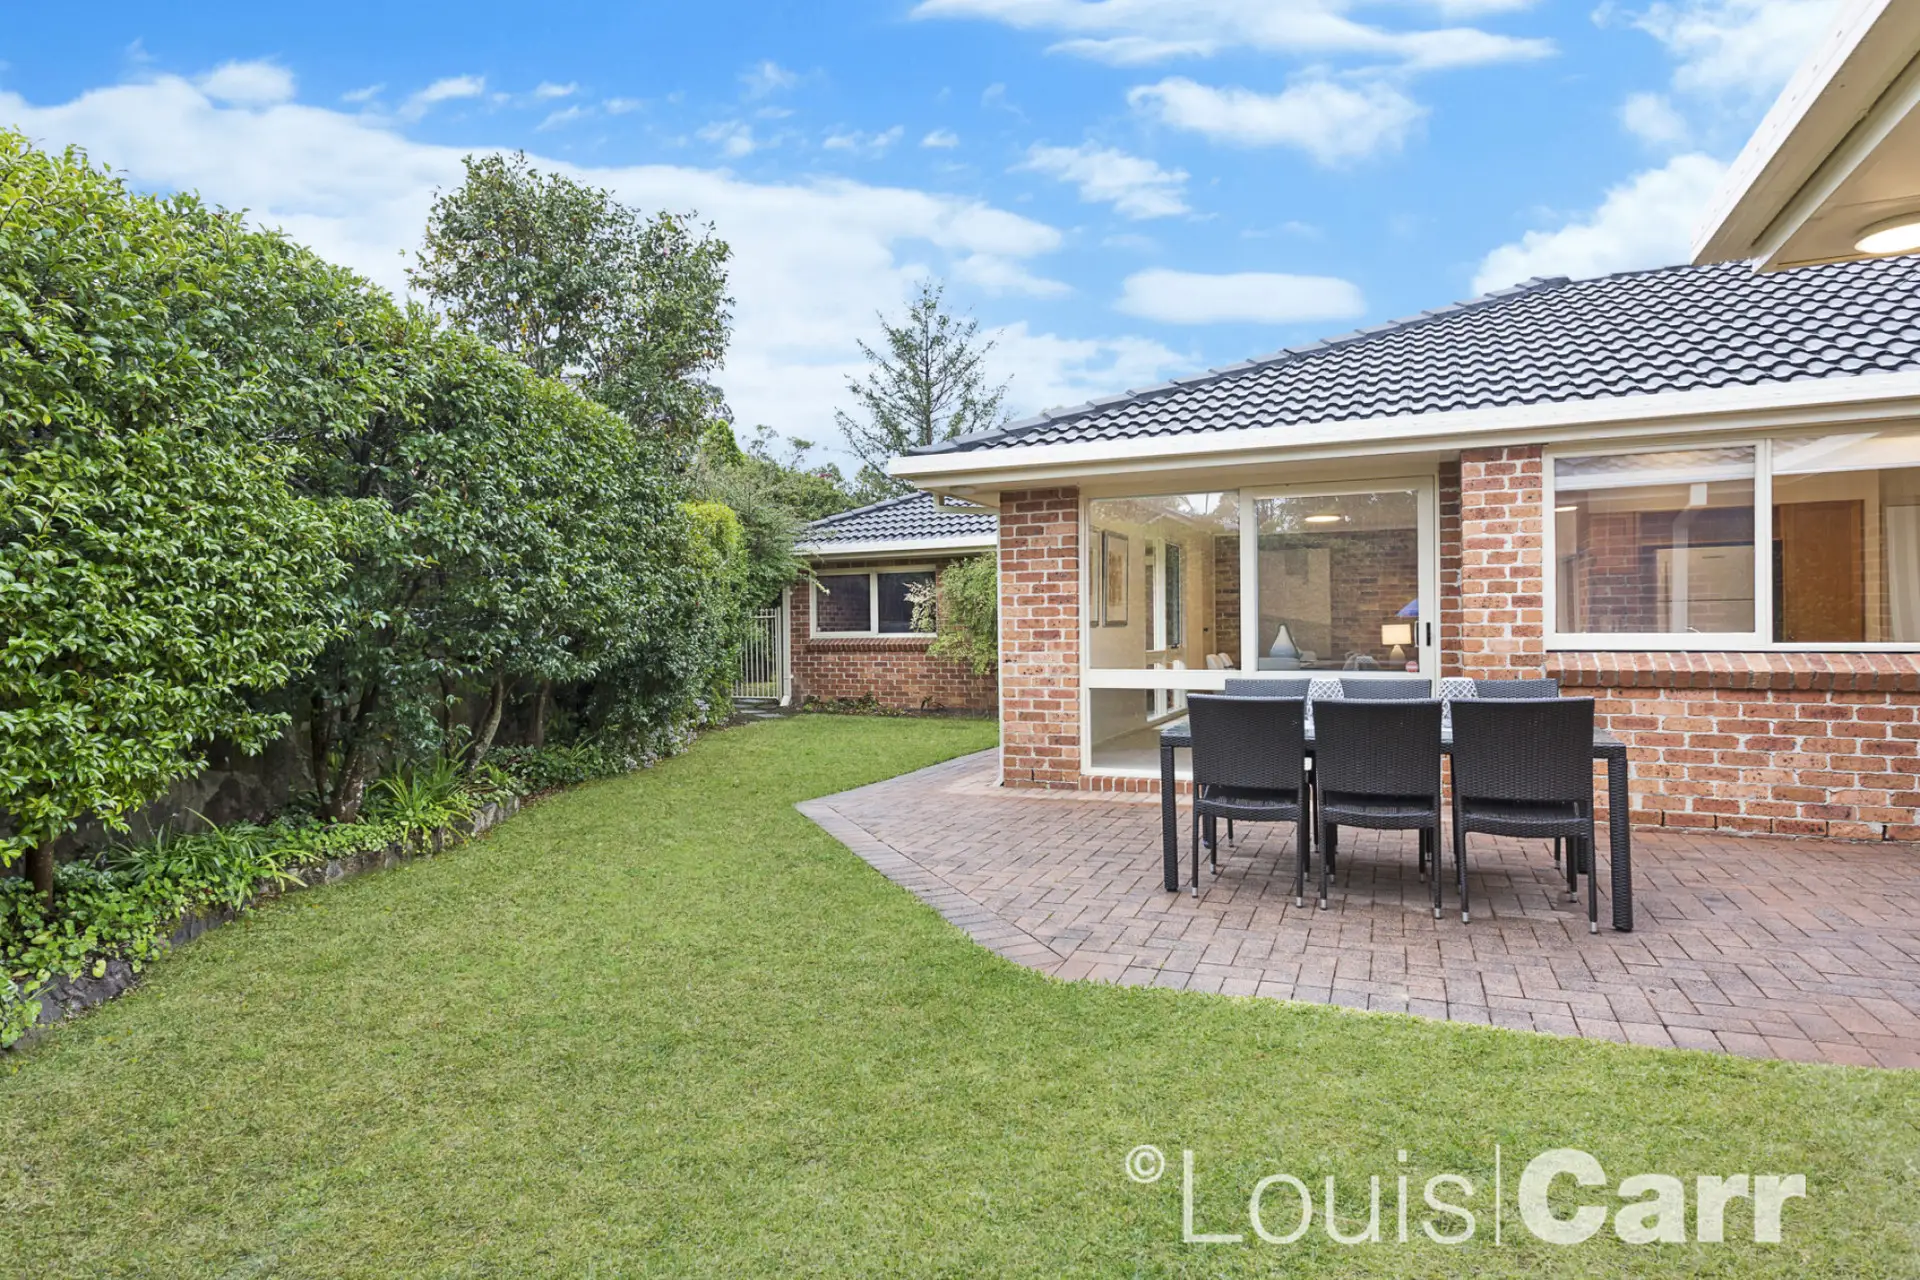 Photo #5: 9 Pogson Drive, Cherrybrook - Sold by Louis Carr Real Estate